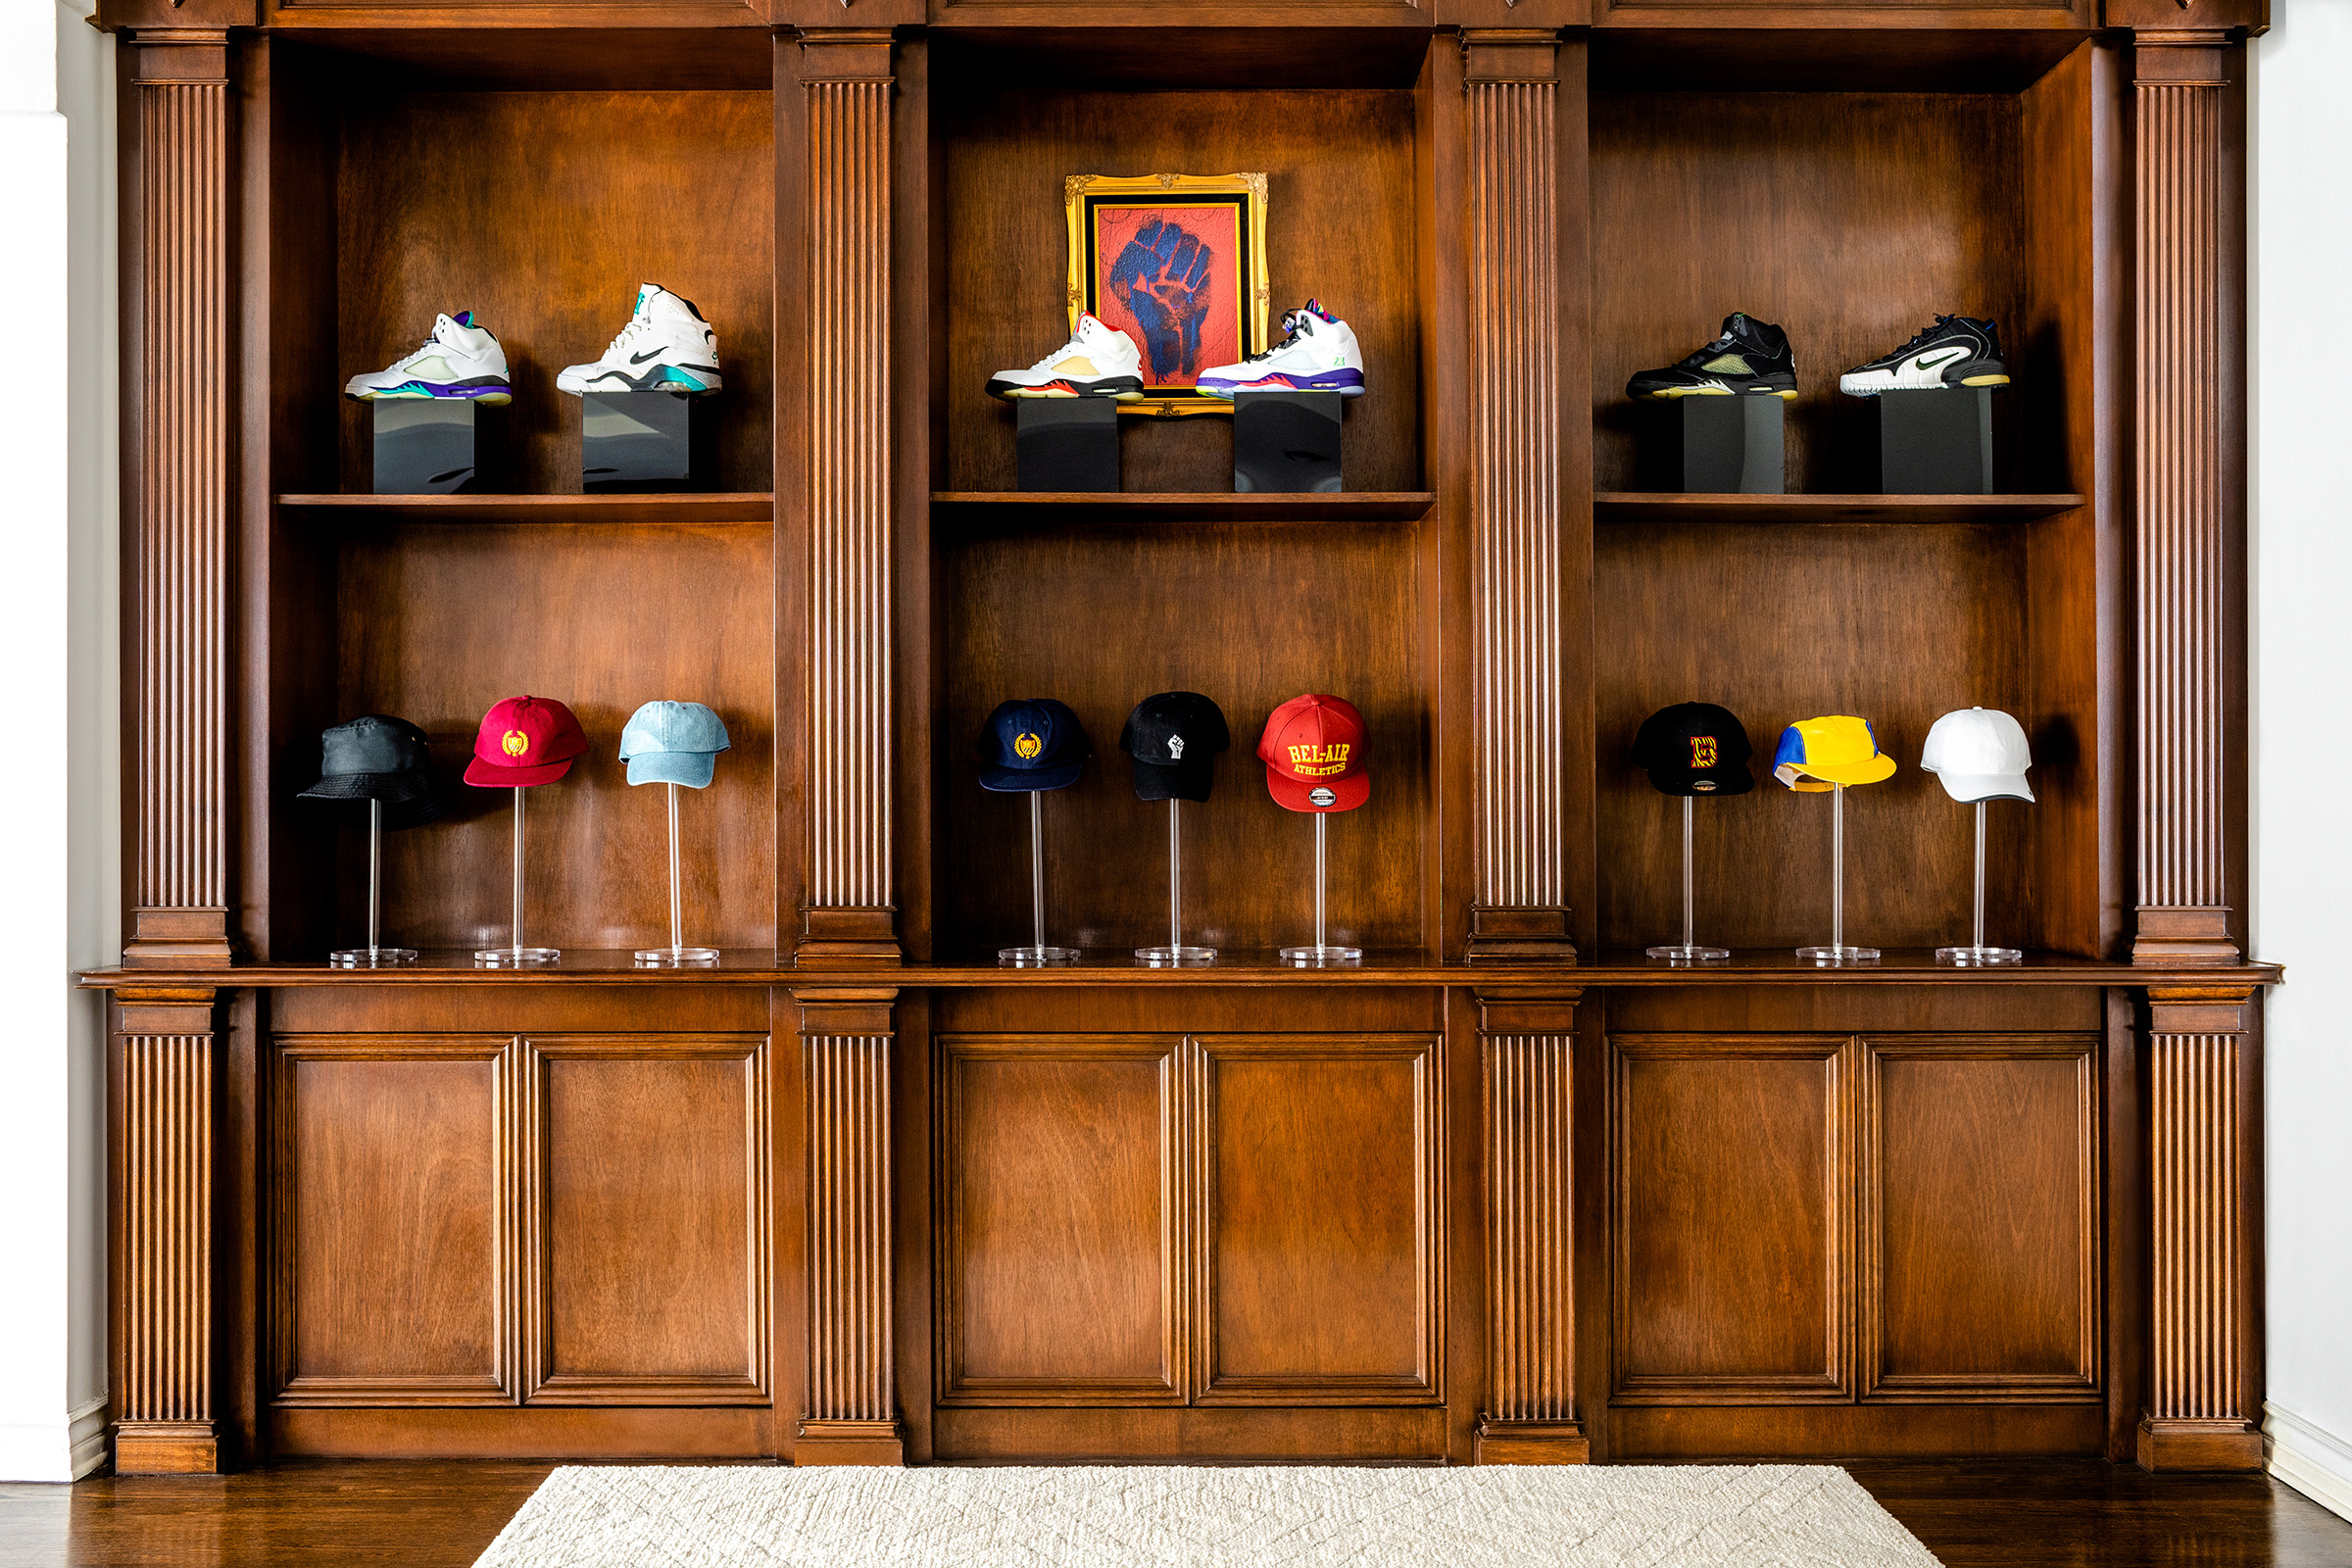 Special Nike sneakers and retro hats line a wall covered in warm wood paneling.